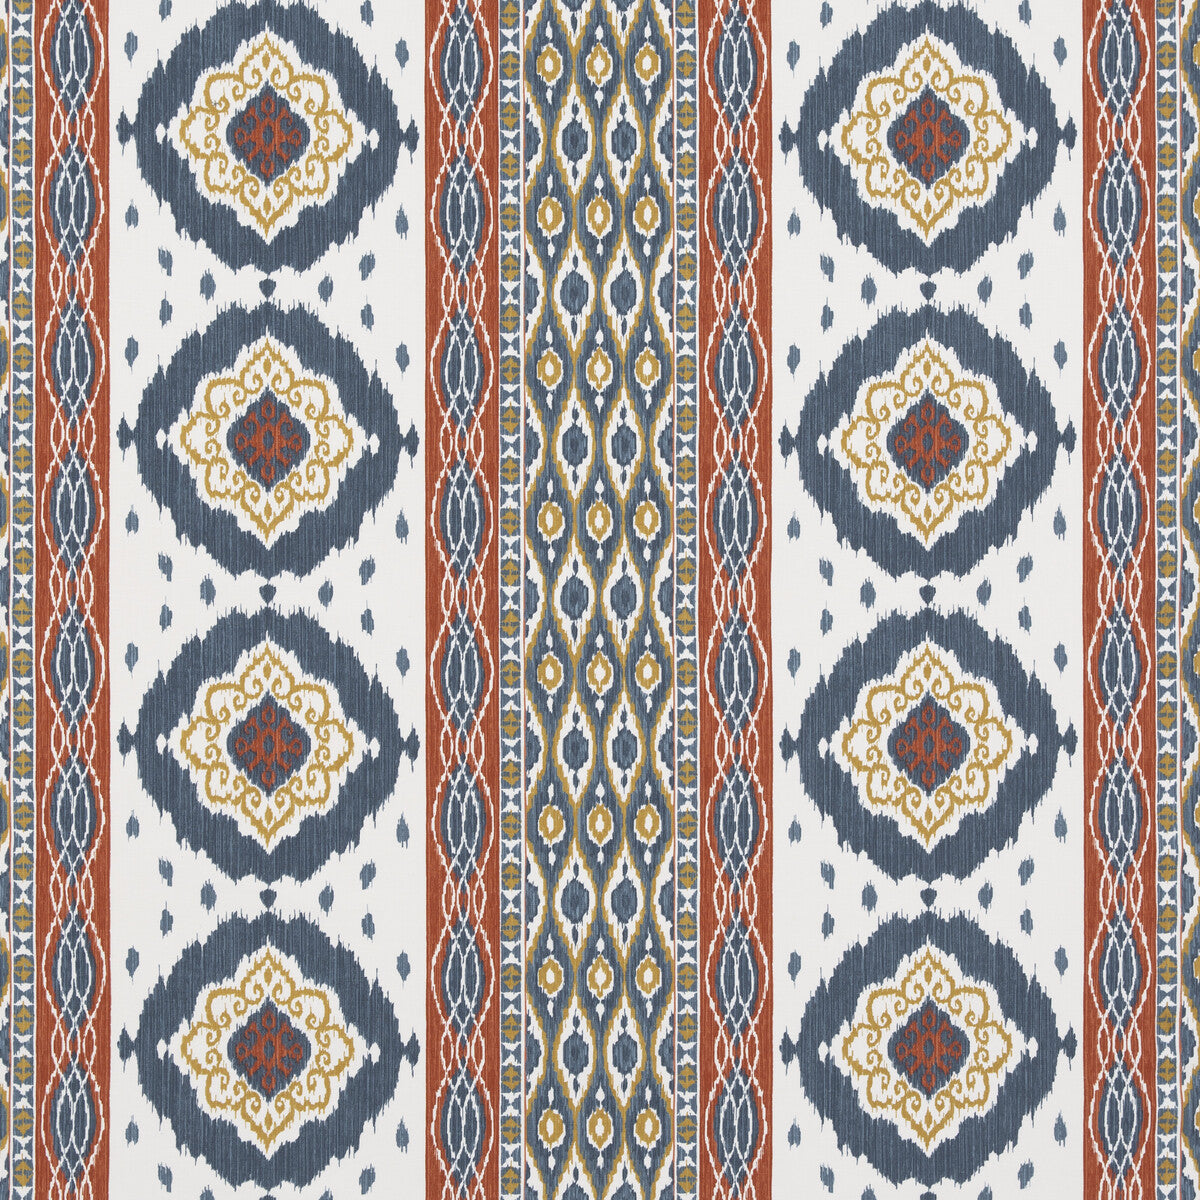 Crosby fabric in indigo color - pattern BP10936.1.0 - by G P &amp; J Baker in the Caspian collection